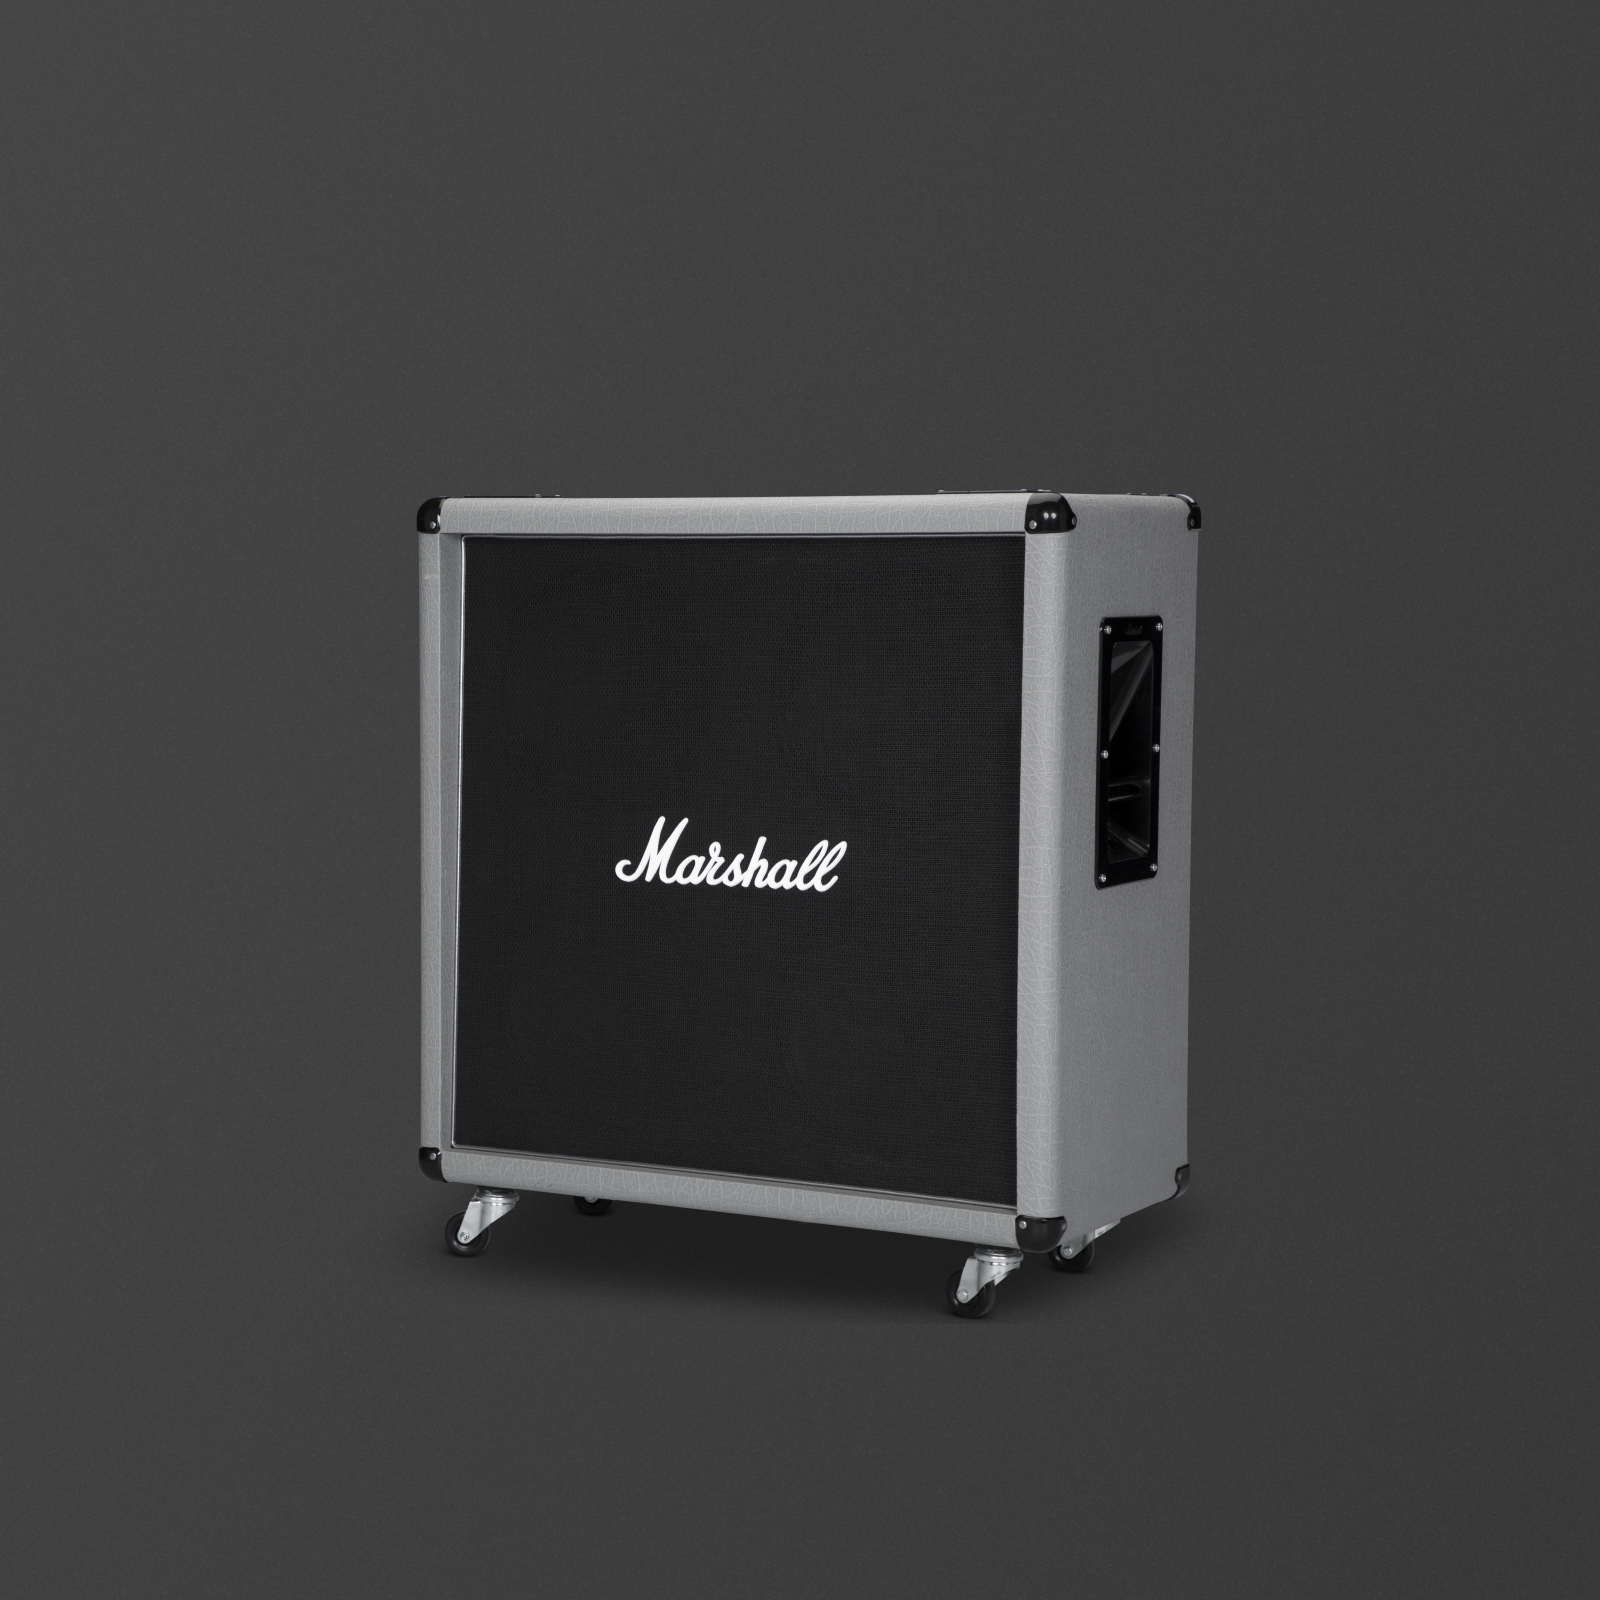 A Marshall 2551BV in silver vinyl, specifically built to deliver exceptional sound quality and performance.